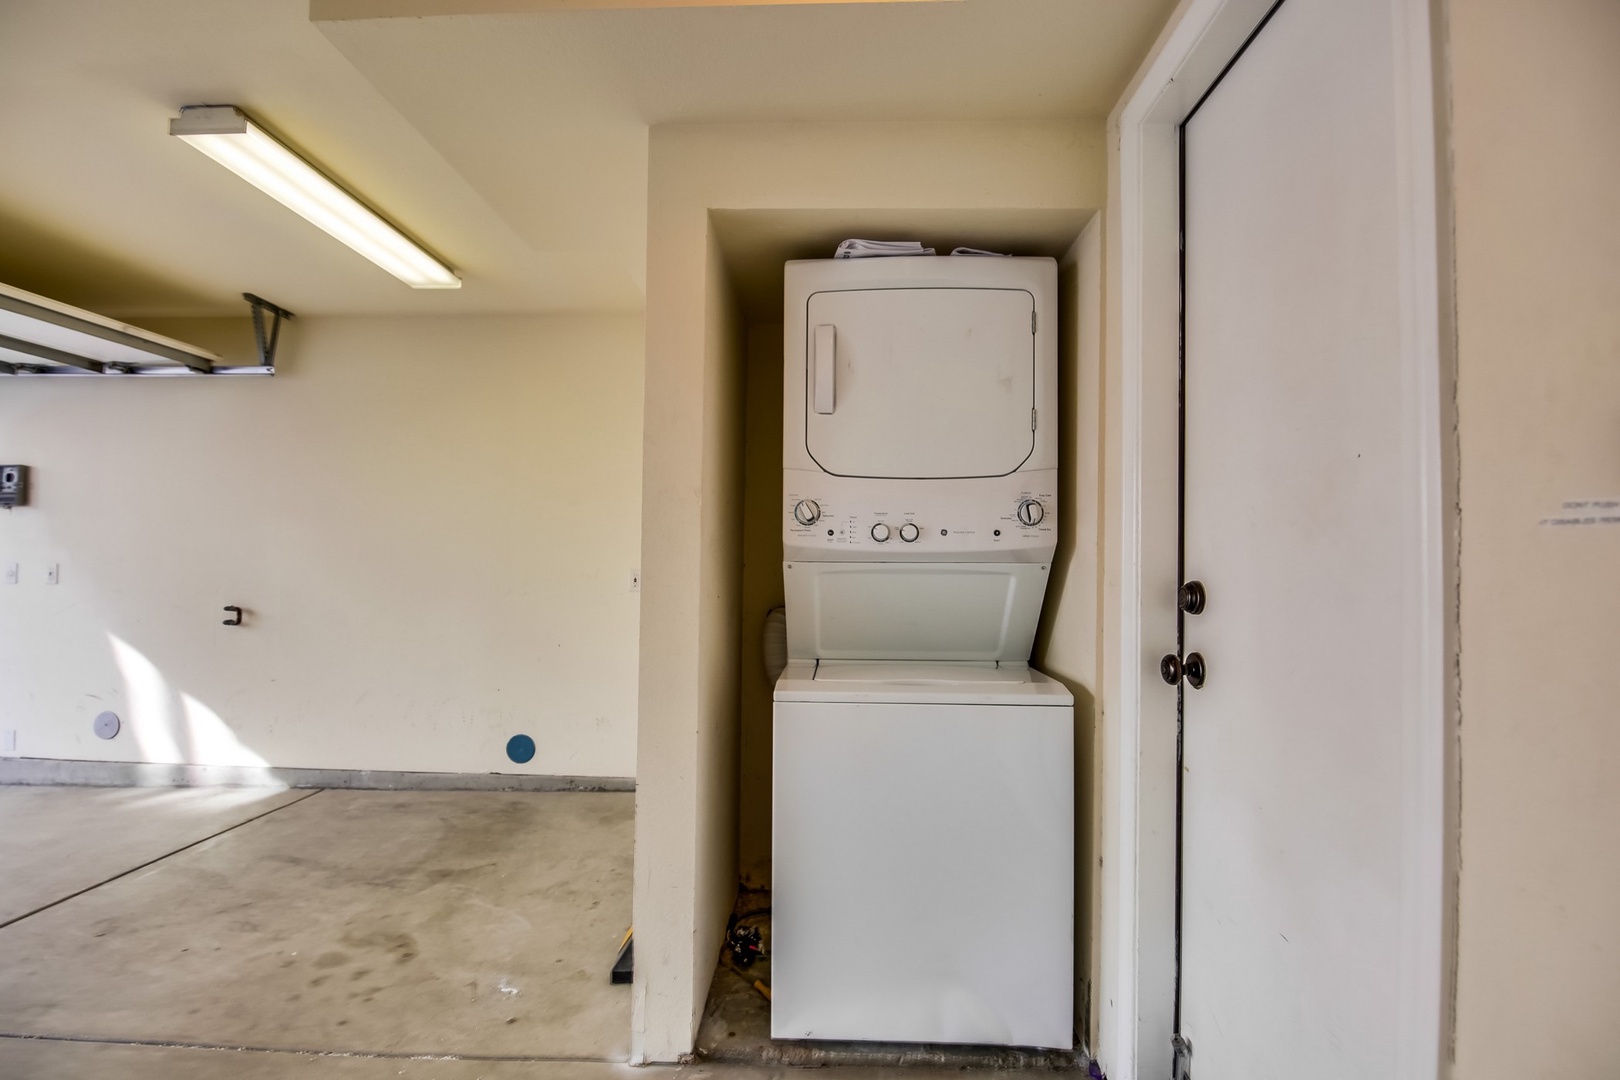 Equipped with washer and dryer